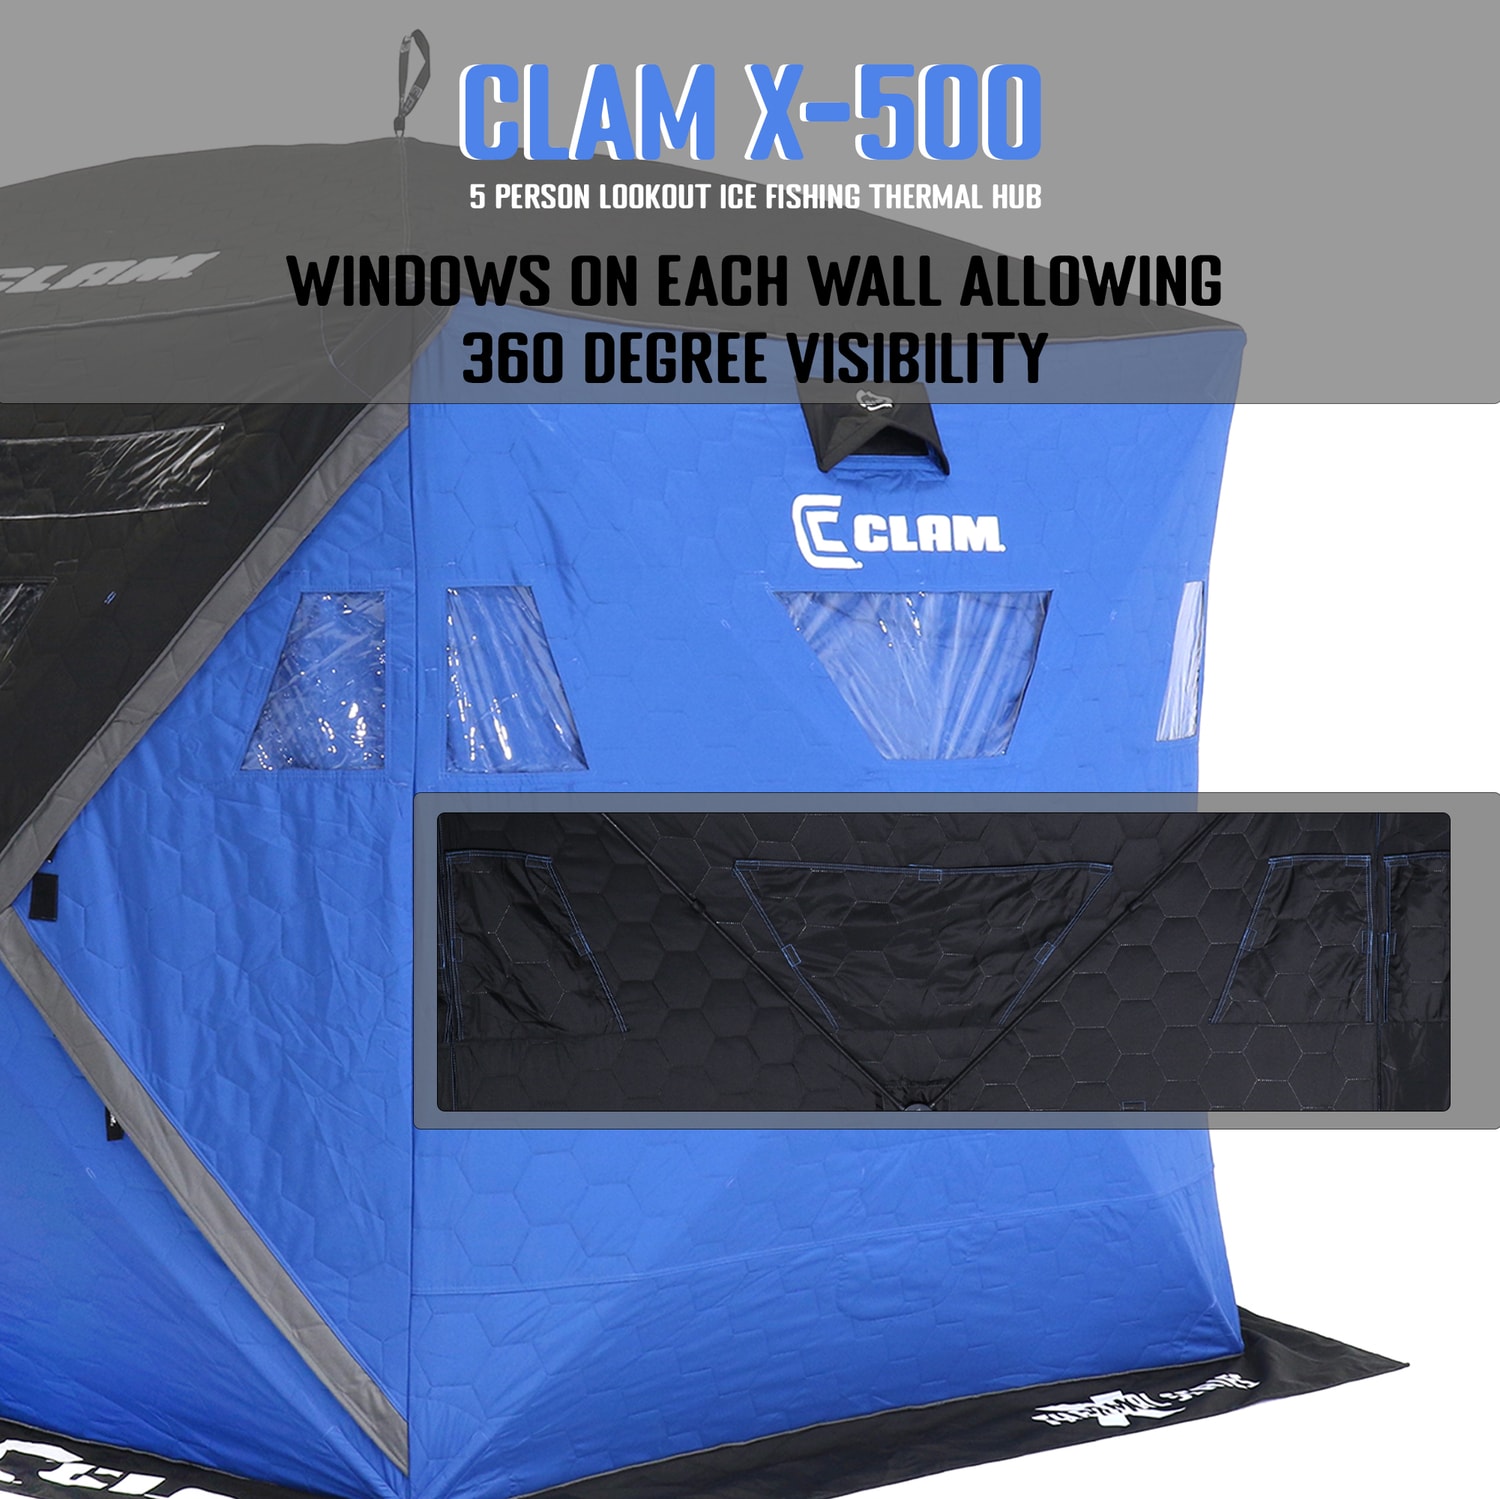 Clam X500 Insulated Thermal Lookout Outdoor Fishing Hunting Hub Tent Shelter